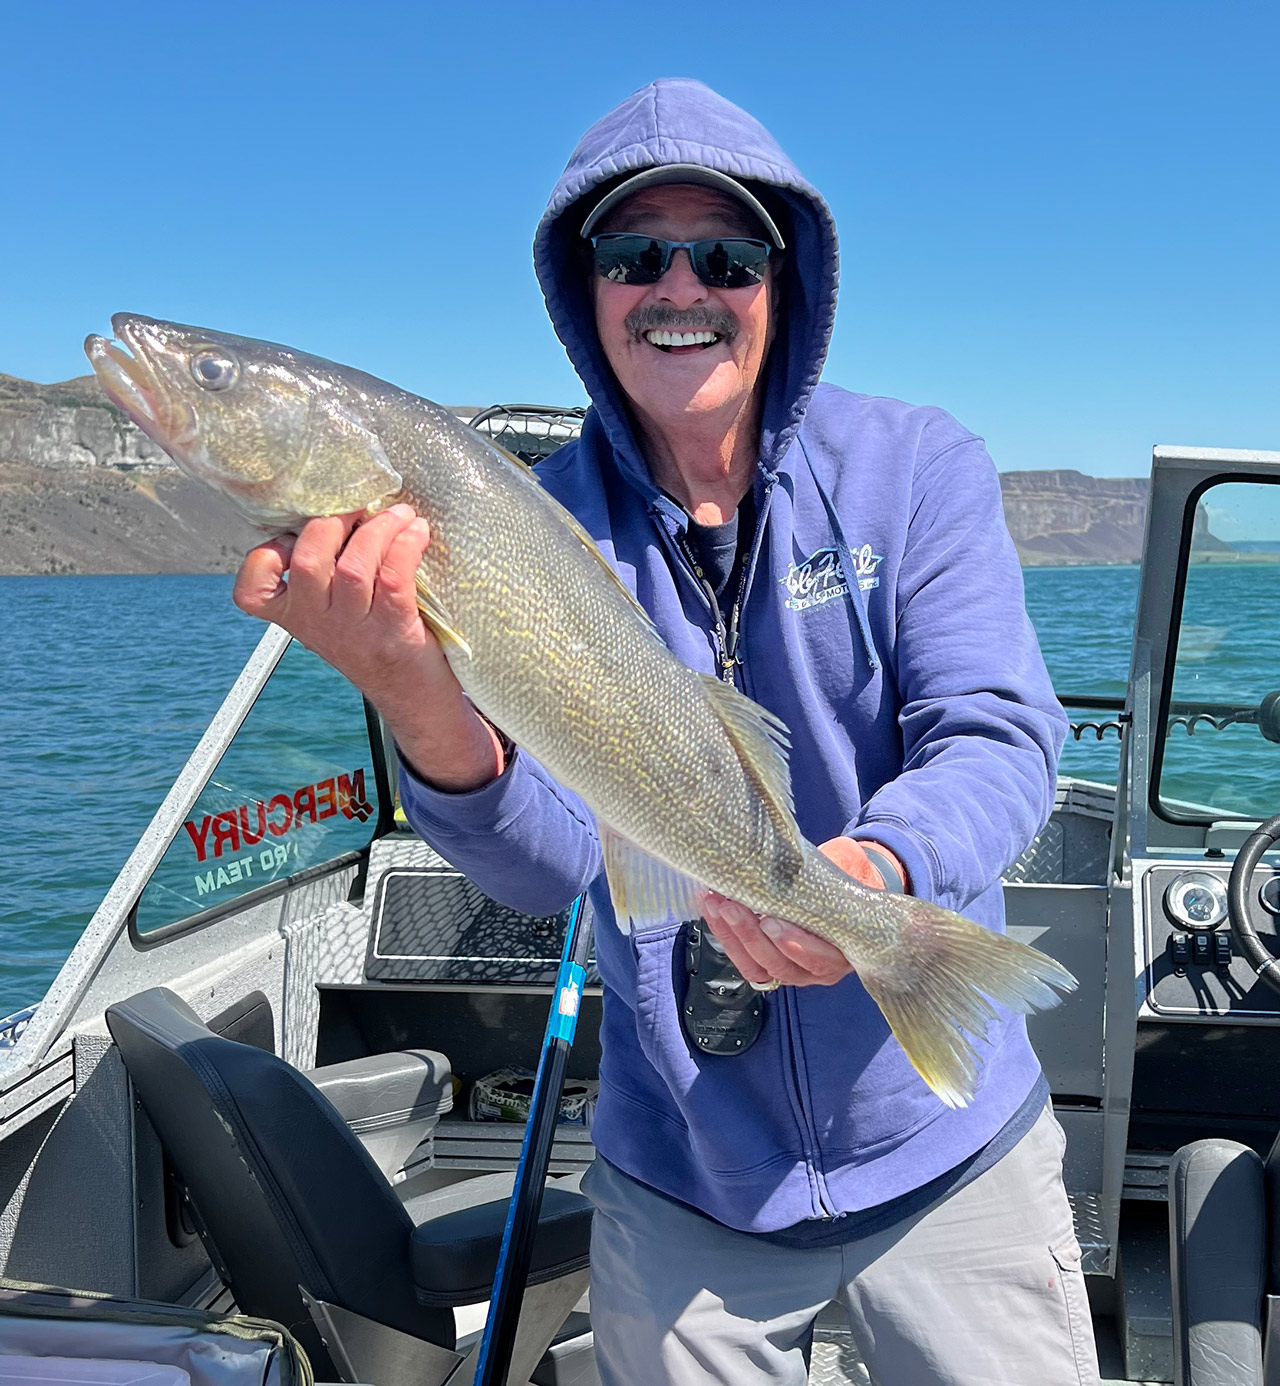 This week's photo is of the 25-inch walleye we released.